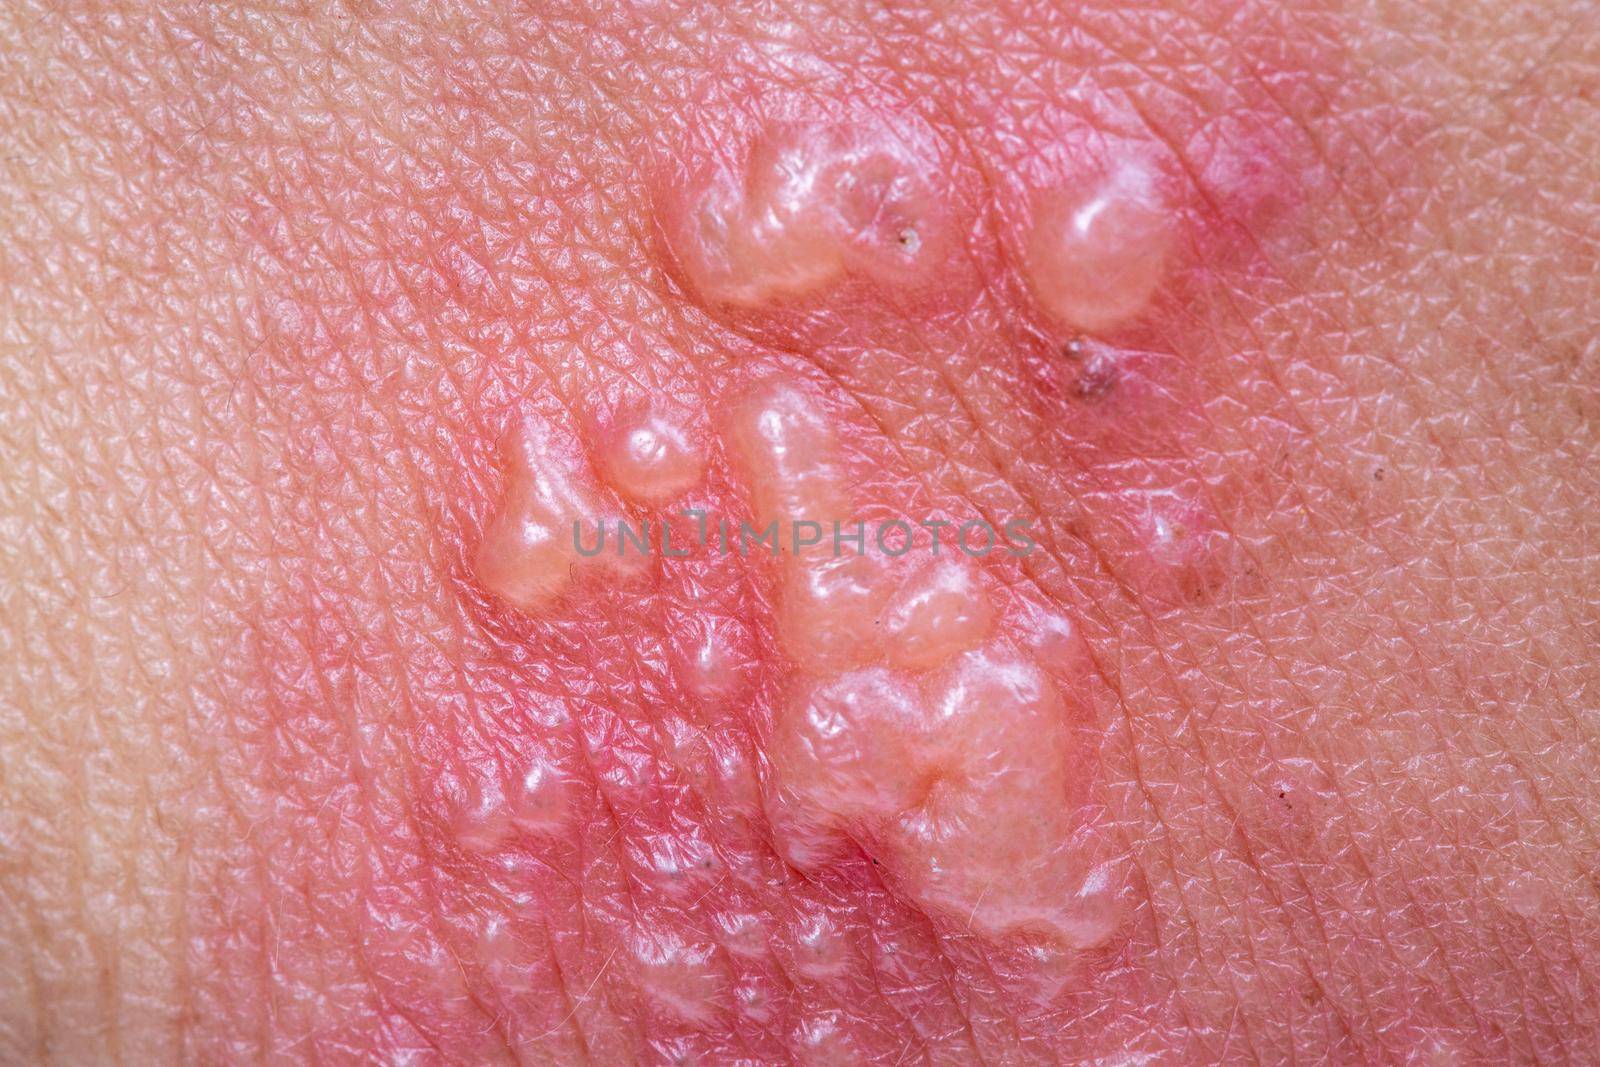 Shingles, Zoster or Herpes Zoster symptoms on arm by toa55